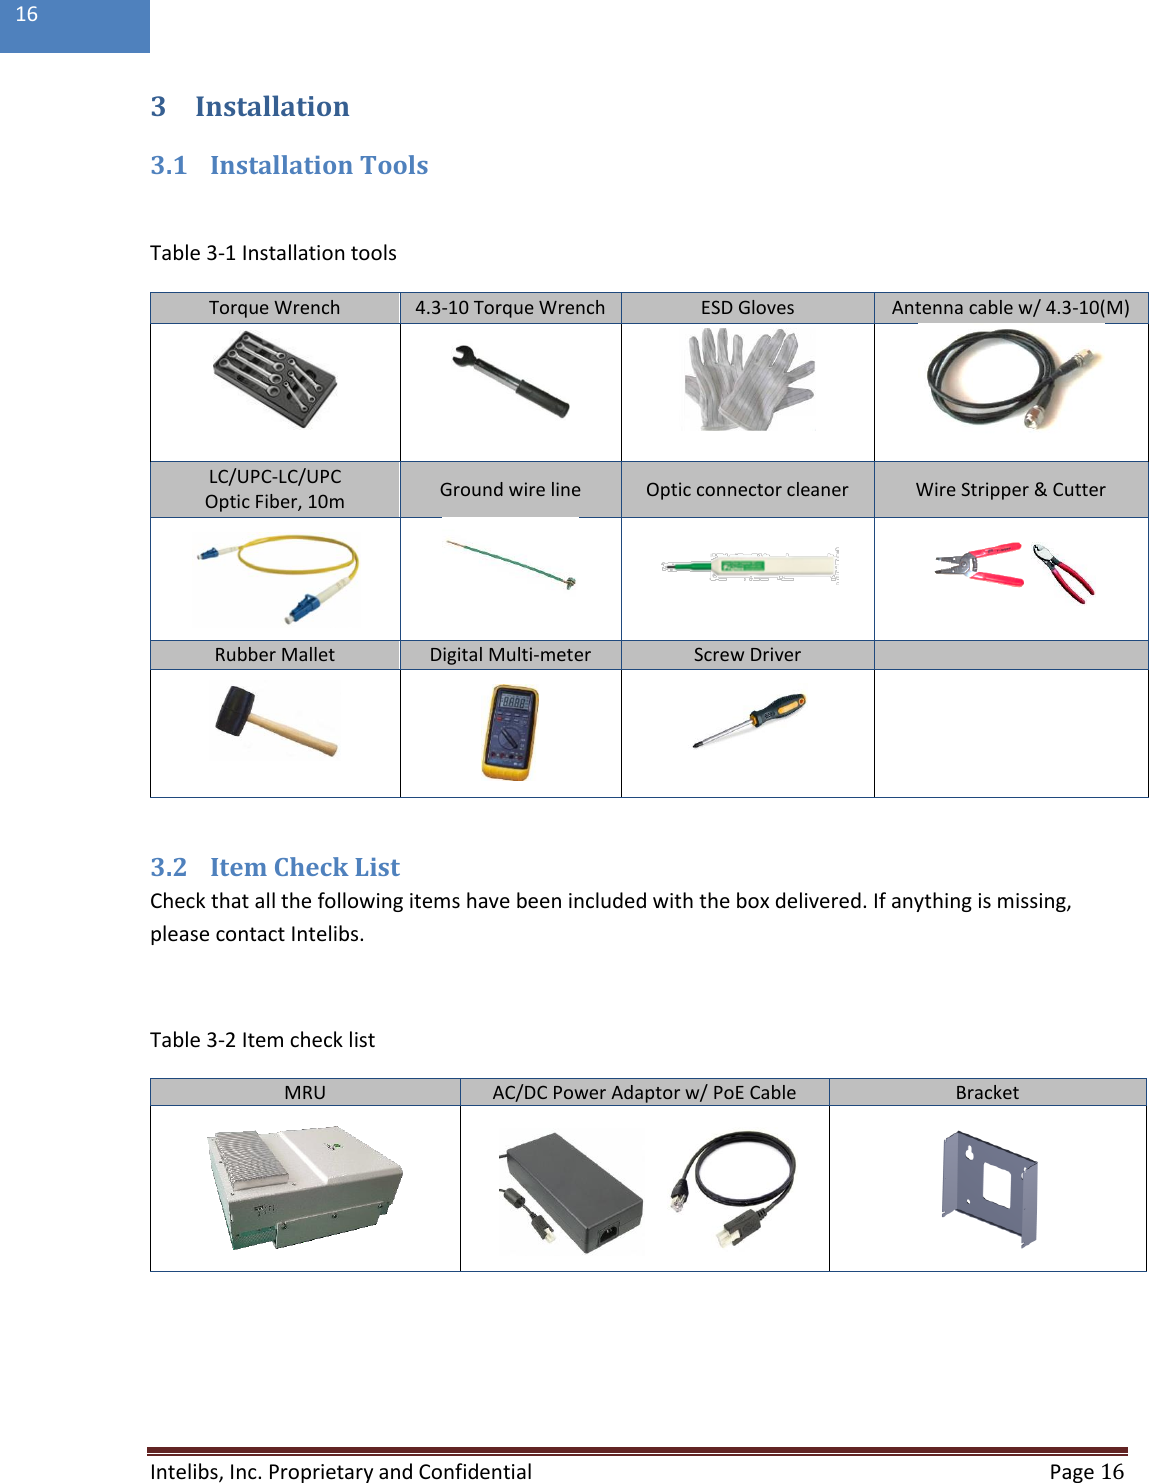  Intelibs, Inc. Proprietary and Confidential   Page 16  16  3 Installation 3.1 Installation Tools  Table 3-1 Installation tools  3.2 Item Check List Check that all the following items have been included with the box delivered. If anything is missing, please contact Intelibs.  Table 3-2 Item check list MRU AC/DC Power Adaptor w/ PoE Cable Bracket           Torque Wrench 4.3-10 Torque Wrench ESD Gloves Antenna cable w/ 4.3-10(M)     LC/UPC-LC/UPC Optic Fiber, 10m Ground wire line Optic connector cleaner Wire Stripper &amp; Cutter     Rubber Mallet Digital Multi-meter Screw Driver      